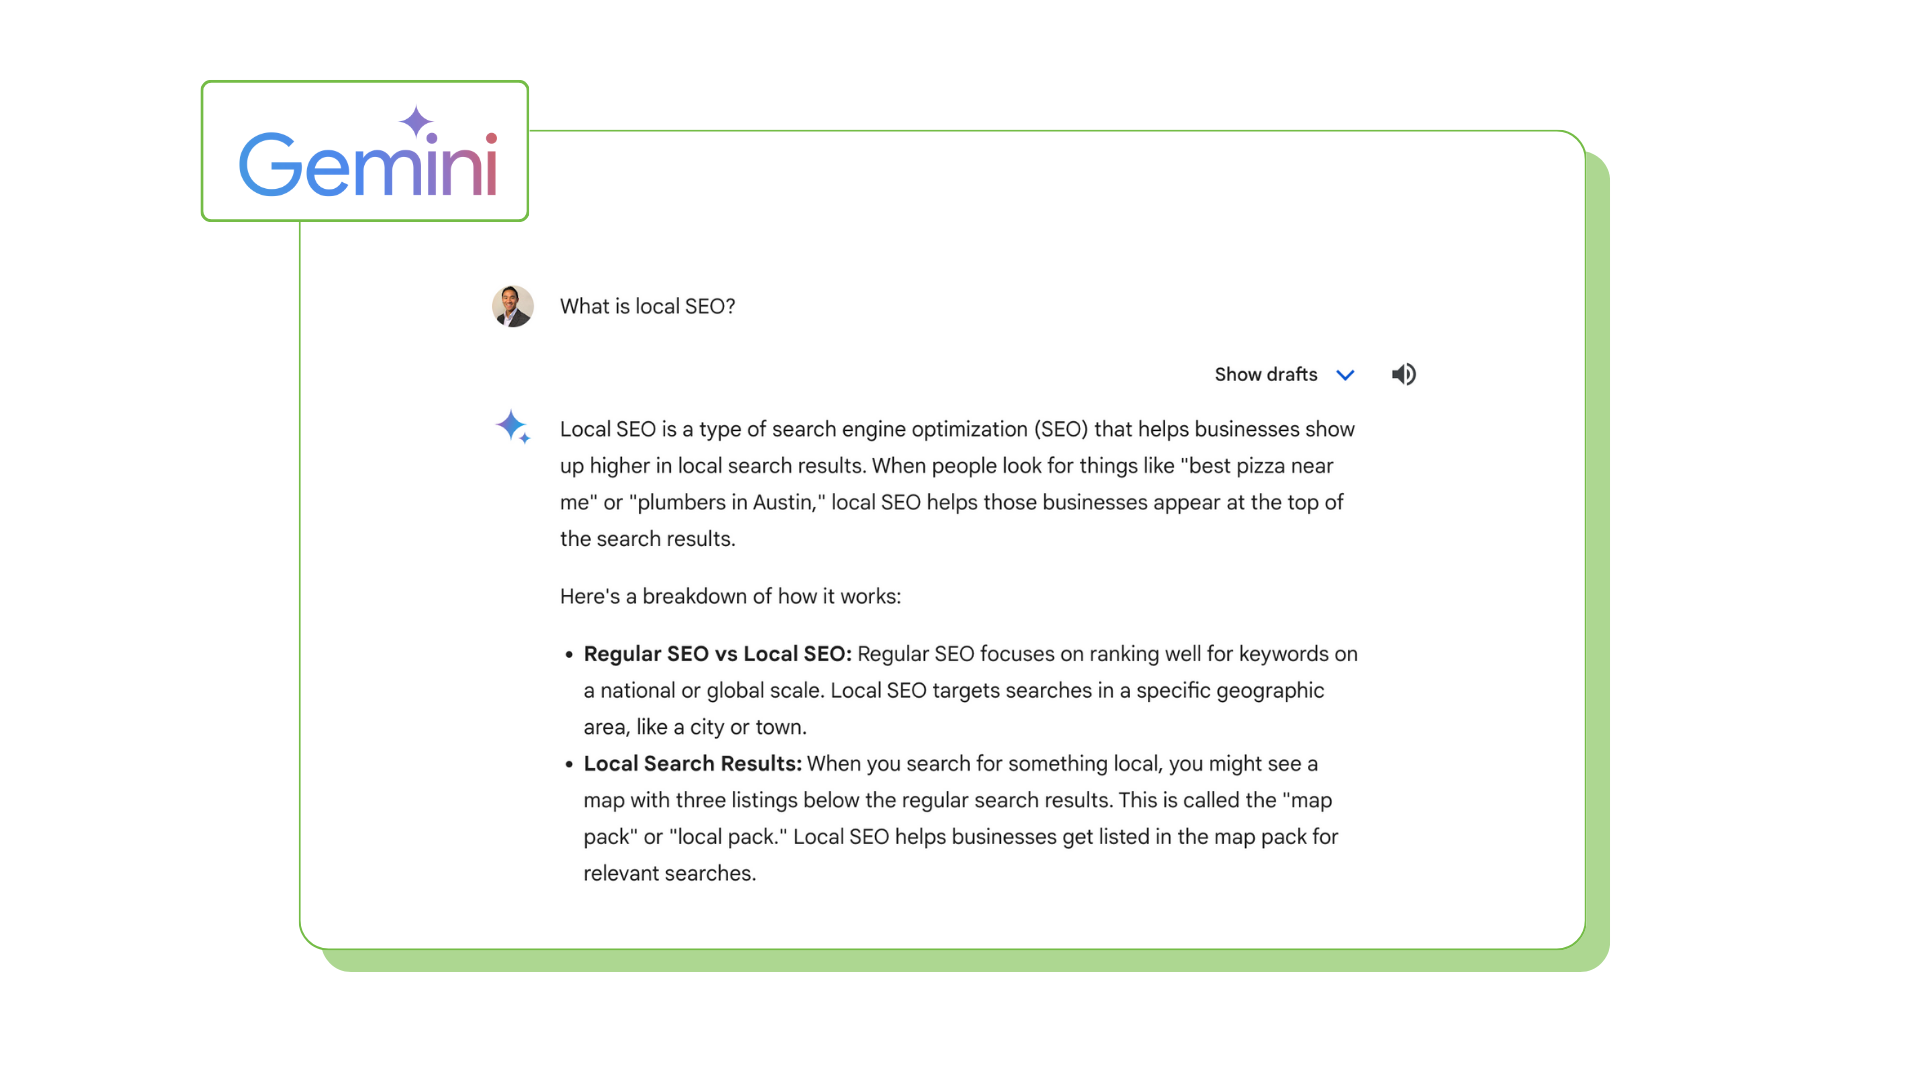 A screenshot of Google Gemini for the search query what is local SEO showing text-generated response with paragraph and bullet points.